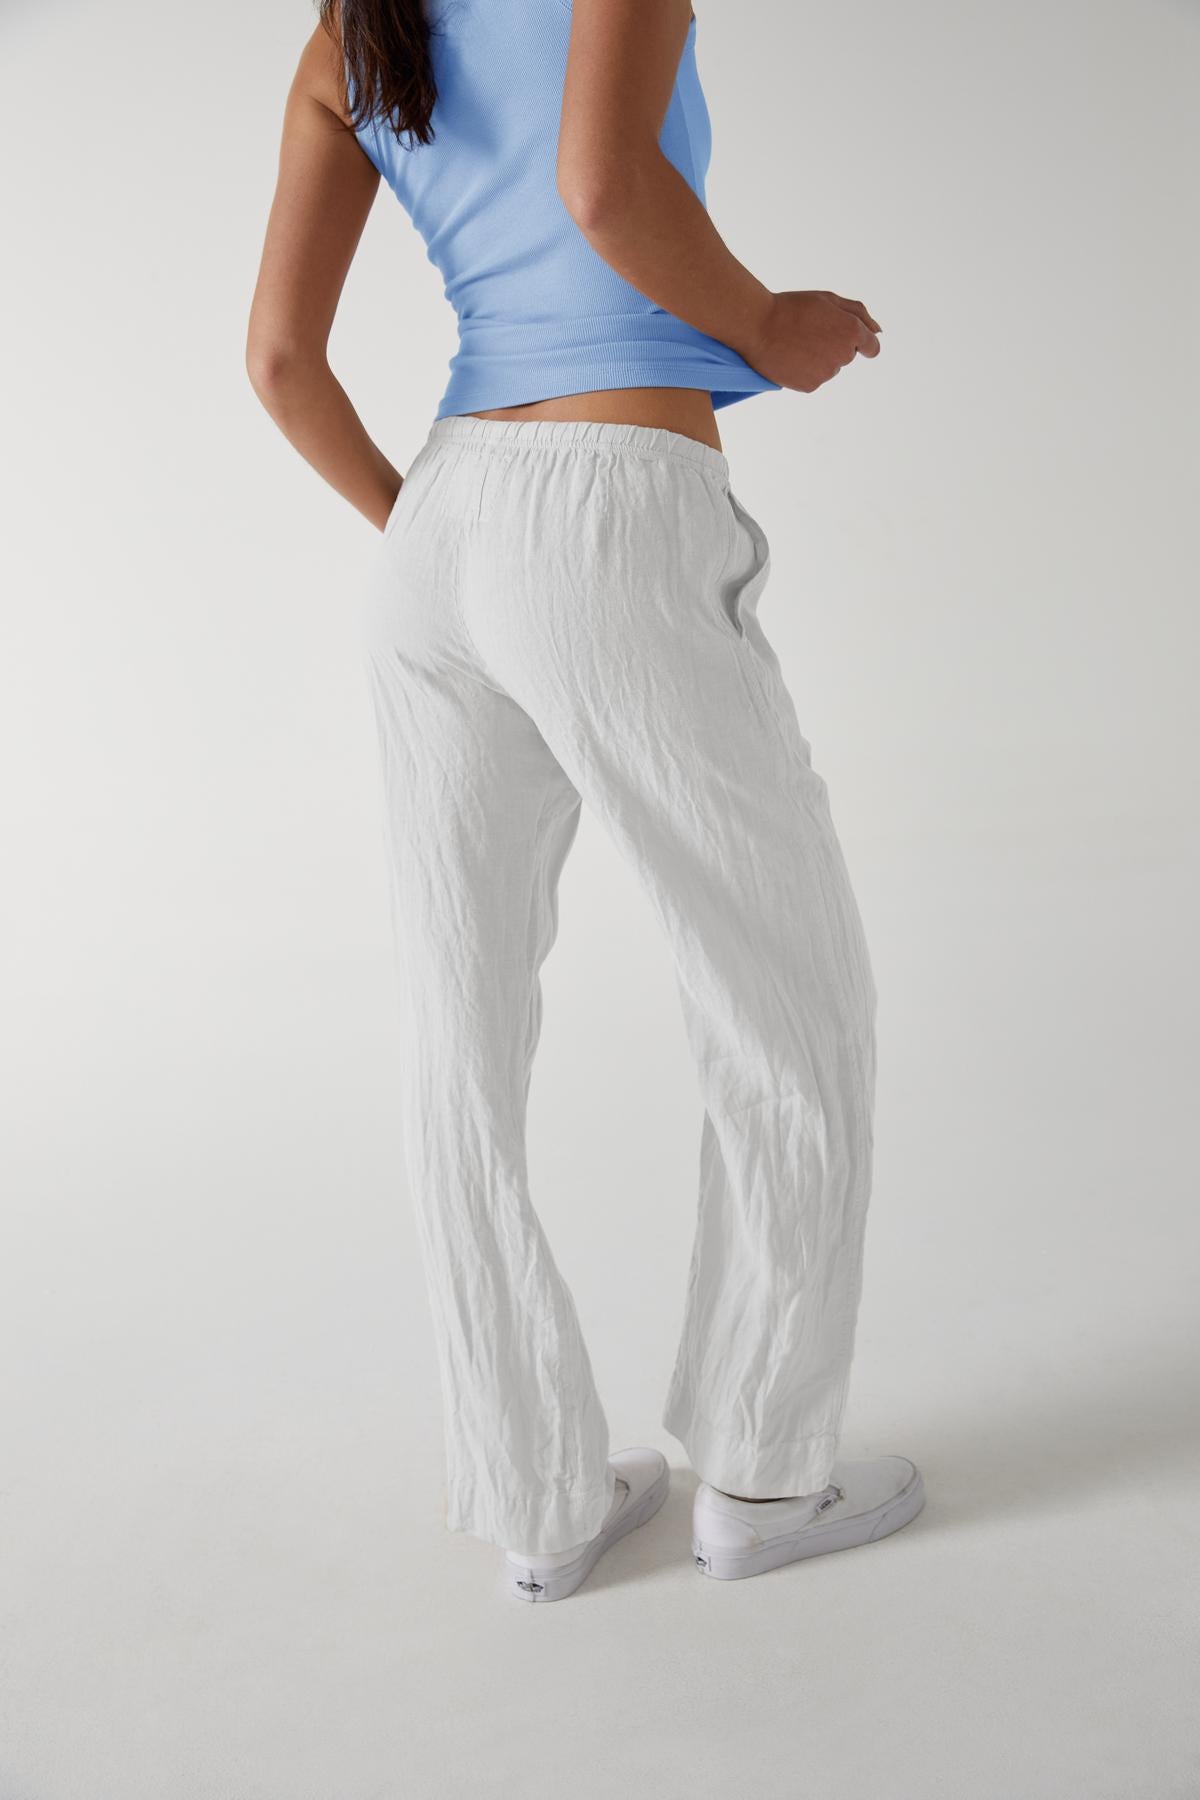 A woman wearing white Velvet by Jenny Graham PICO pants and a blue top.-36168897757377